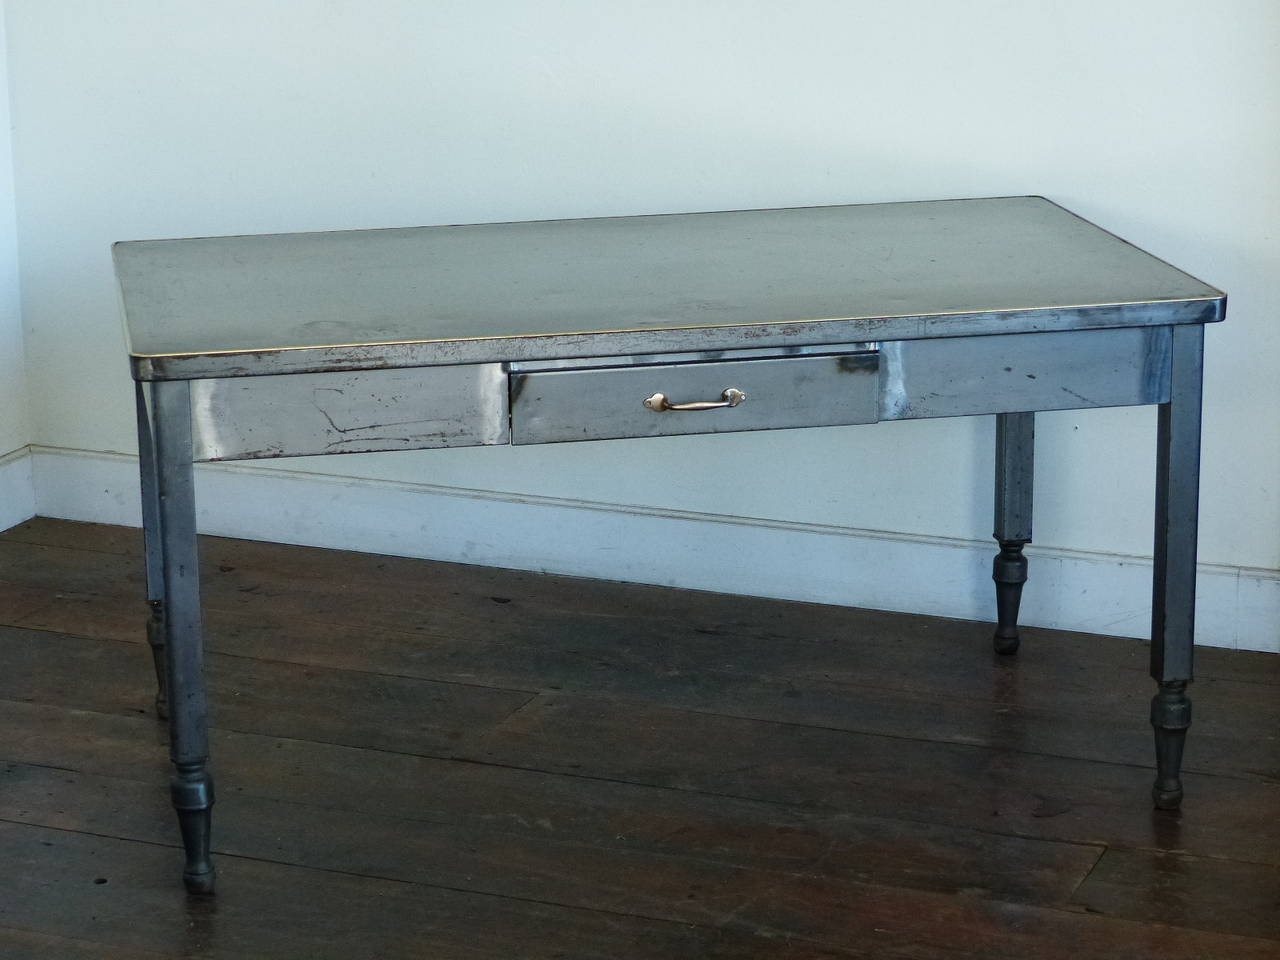 Nice all metal 1930-1940 office desk with cast-turned feet and very nice brass hi-lights
Great size at 60×36 with a nice mellow patina in raw steel.
Good height, working drawer, and made in USA